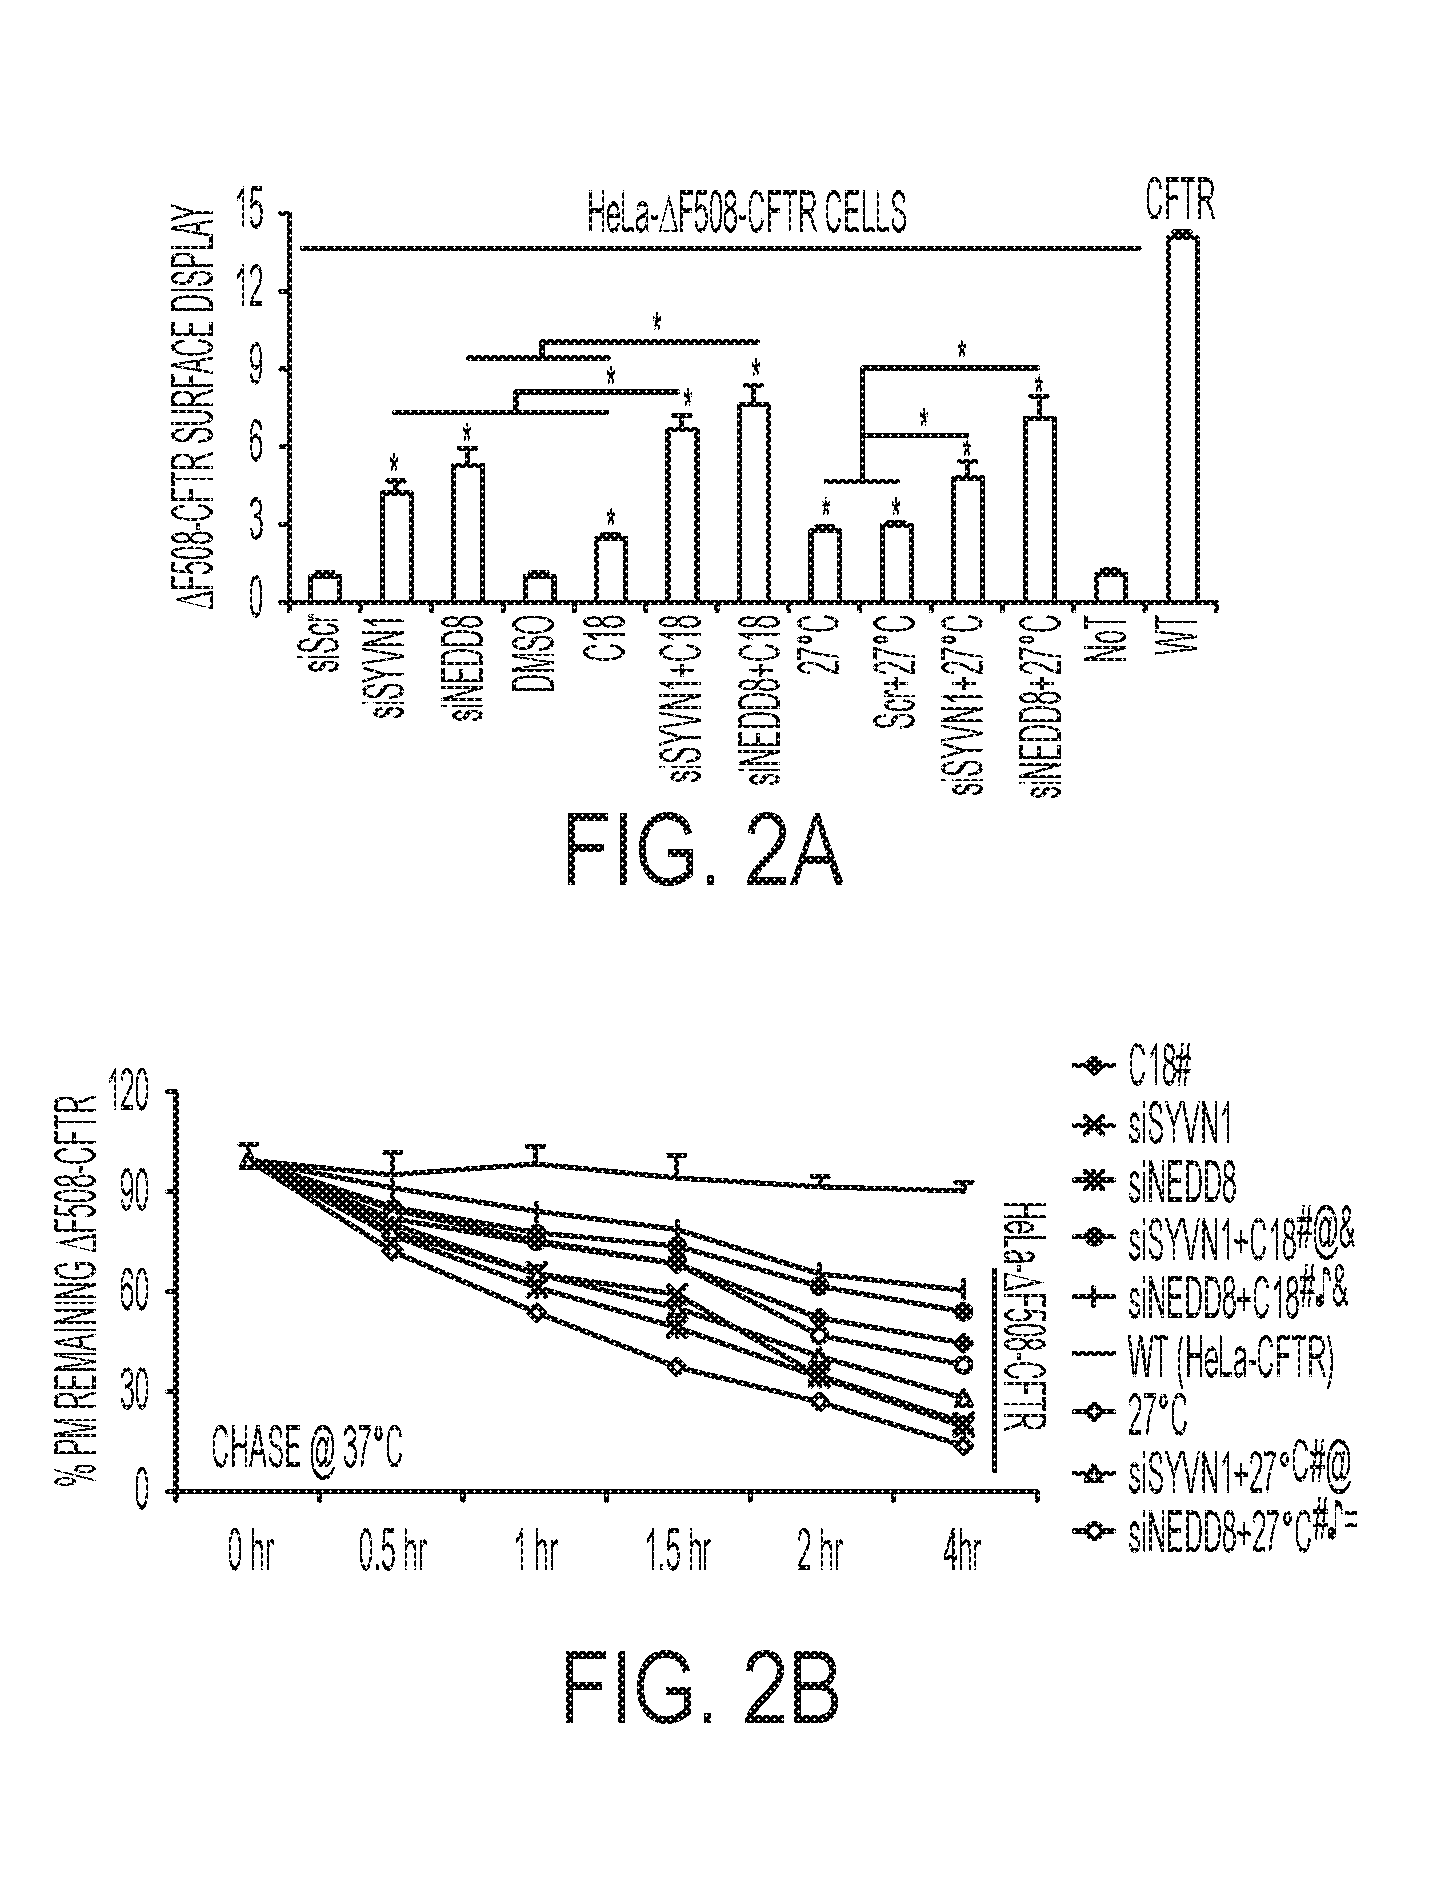 Method of regulating cftr expression and processing